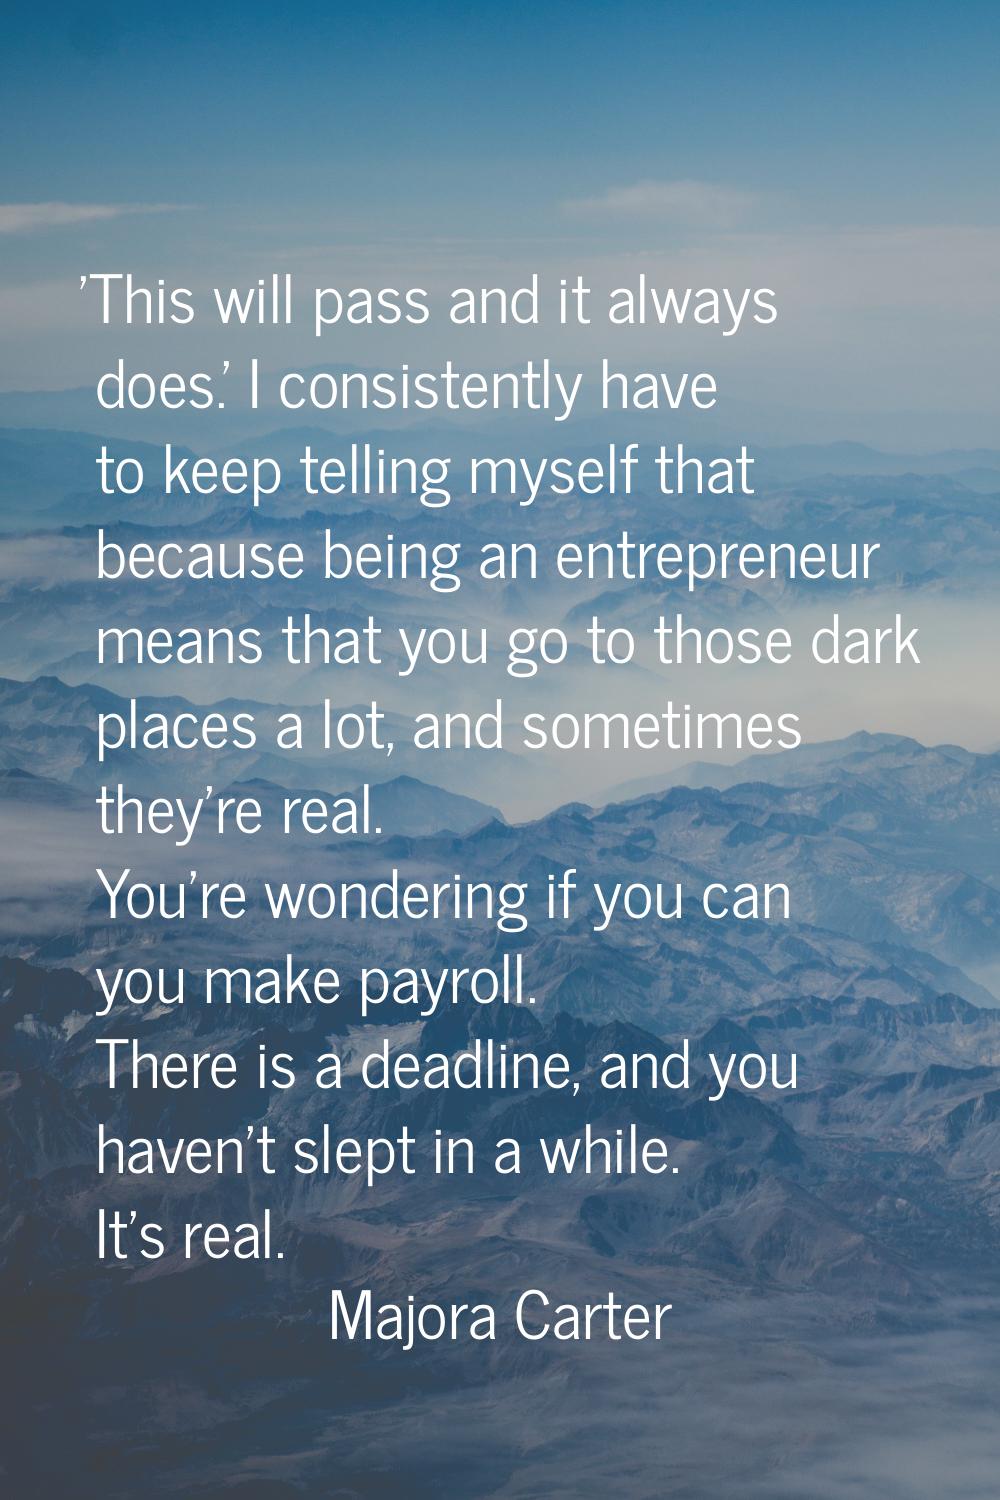 'This will pass and it always does.' I consistently have to keep telling myself that because being 